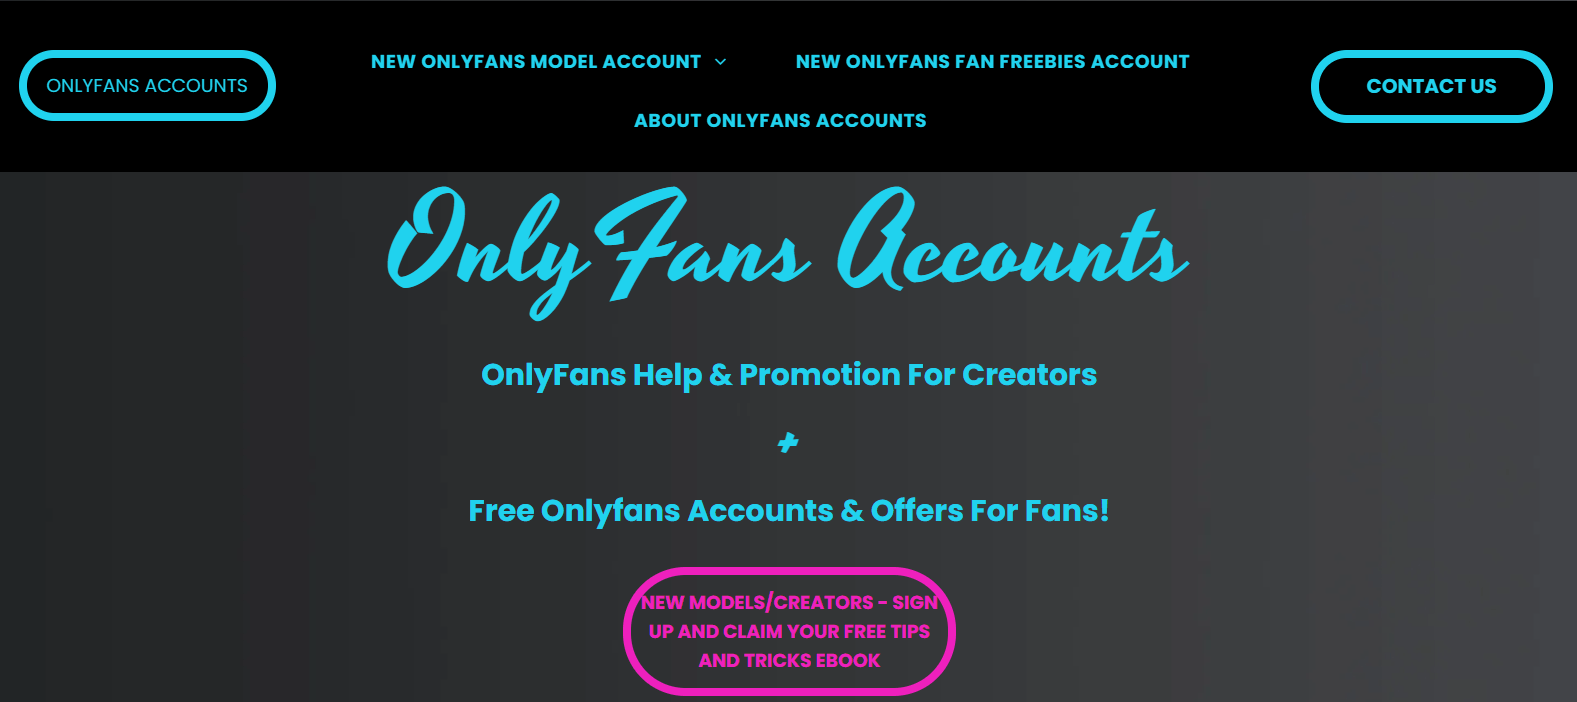 Fans contact only onlyfans Headquarters